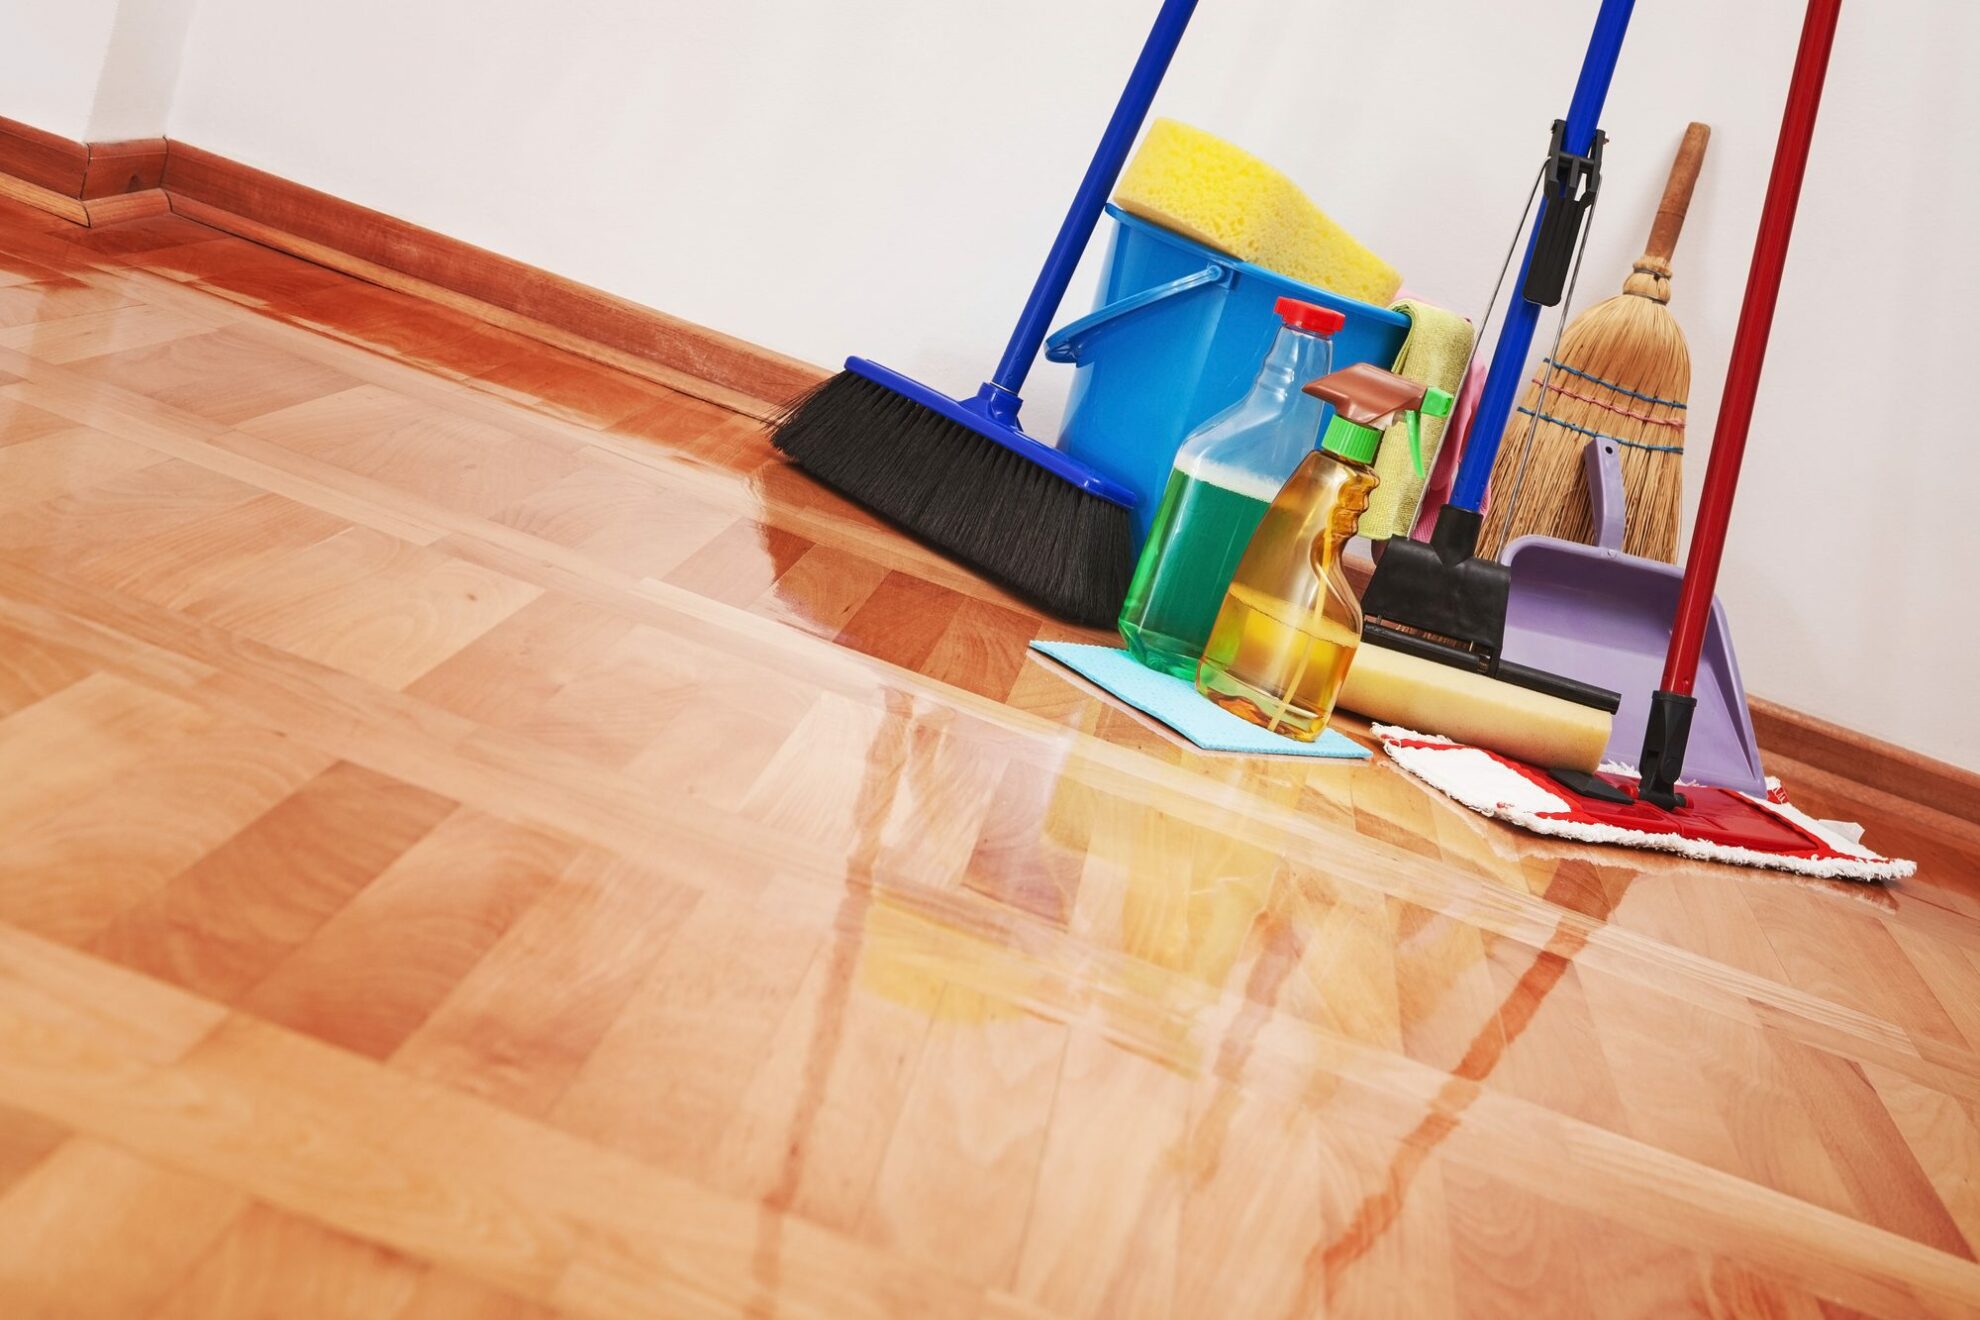 Caring for Hardwood Floors: 3 Tips to Keep Them Clean and Healthy